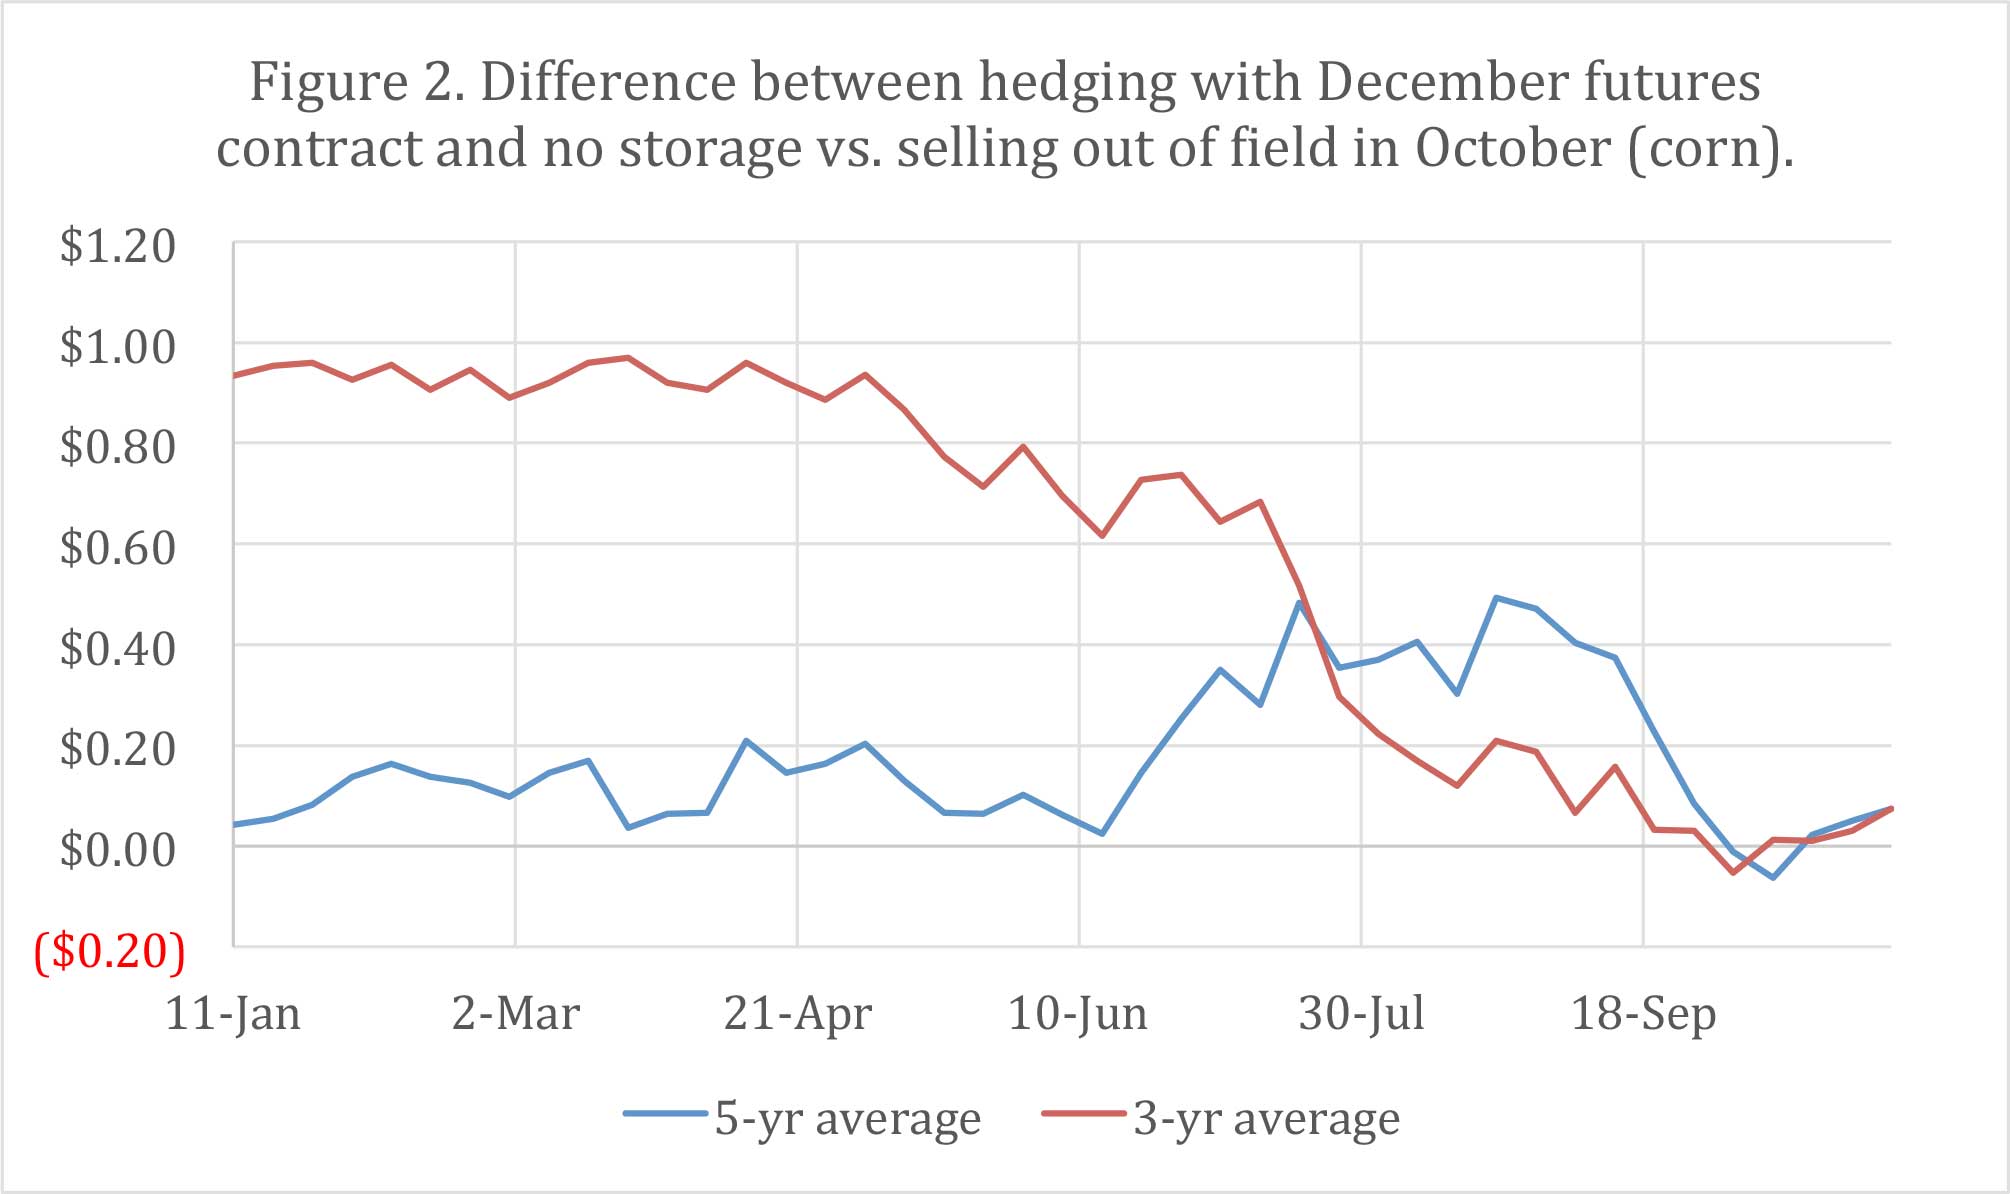 Figure 2. Difference between hedging with December futures contract and no storage vs. selling out of Hield in October (corn). 